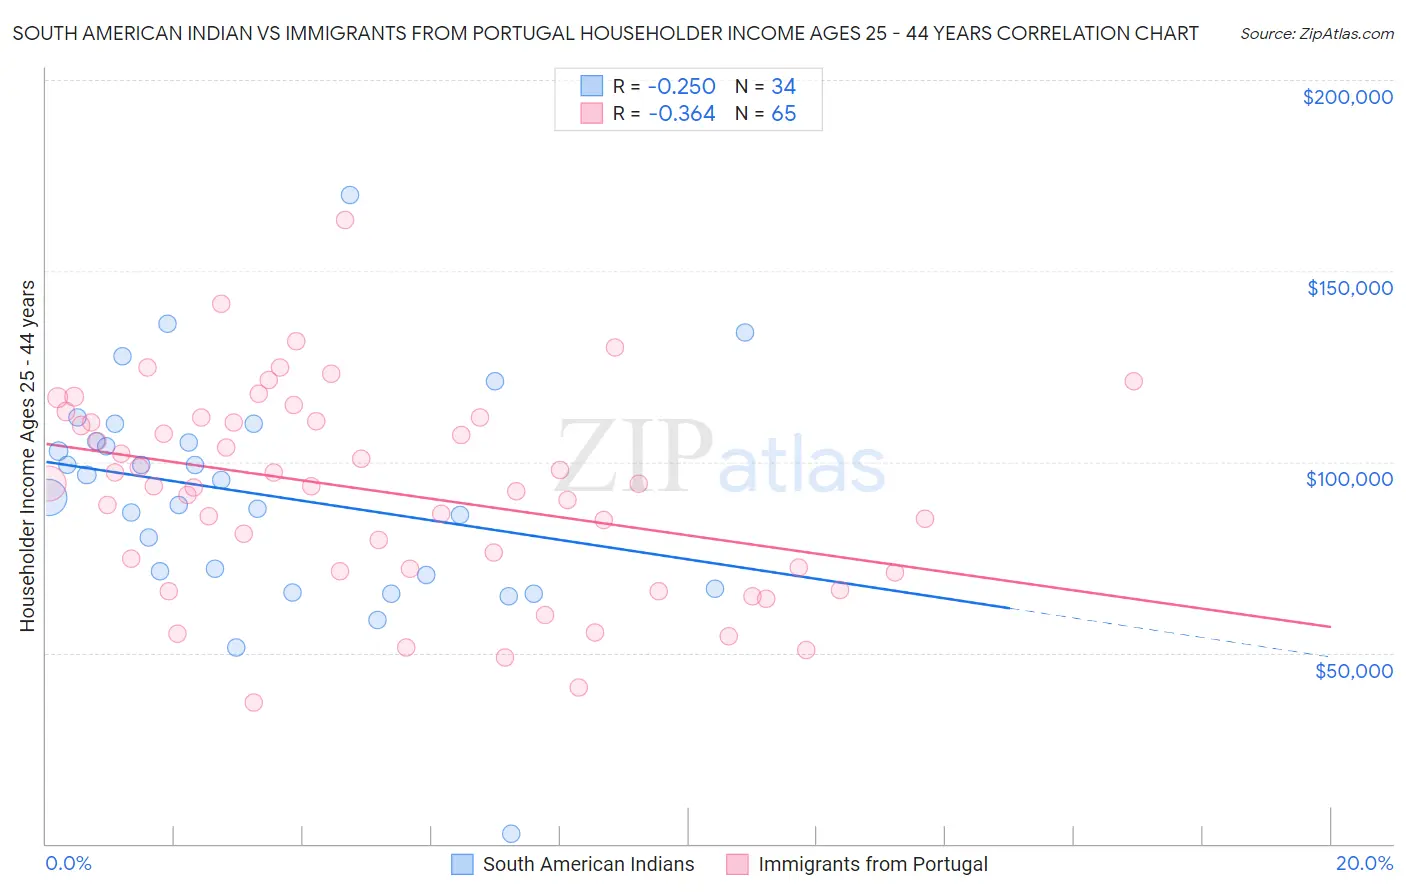 South American Indian vs Immigrants from Portugal Householder Income Ages 25 - 44 years